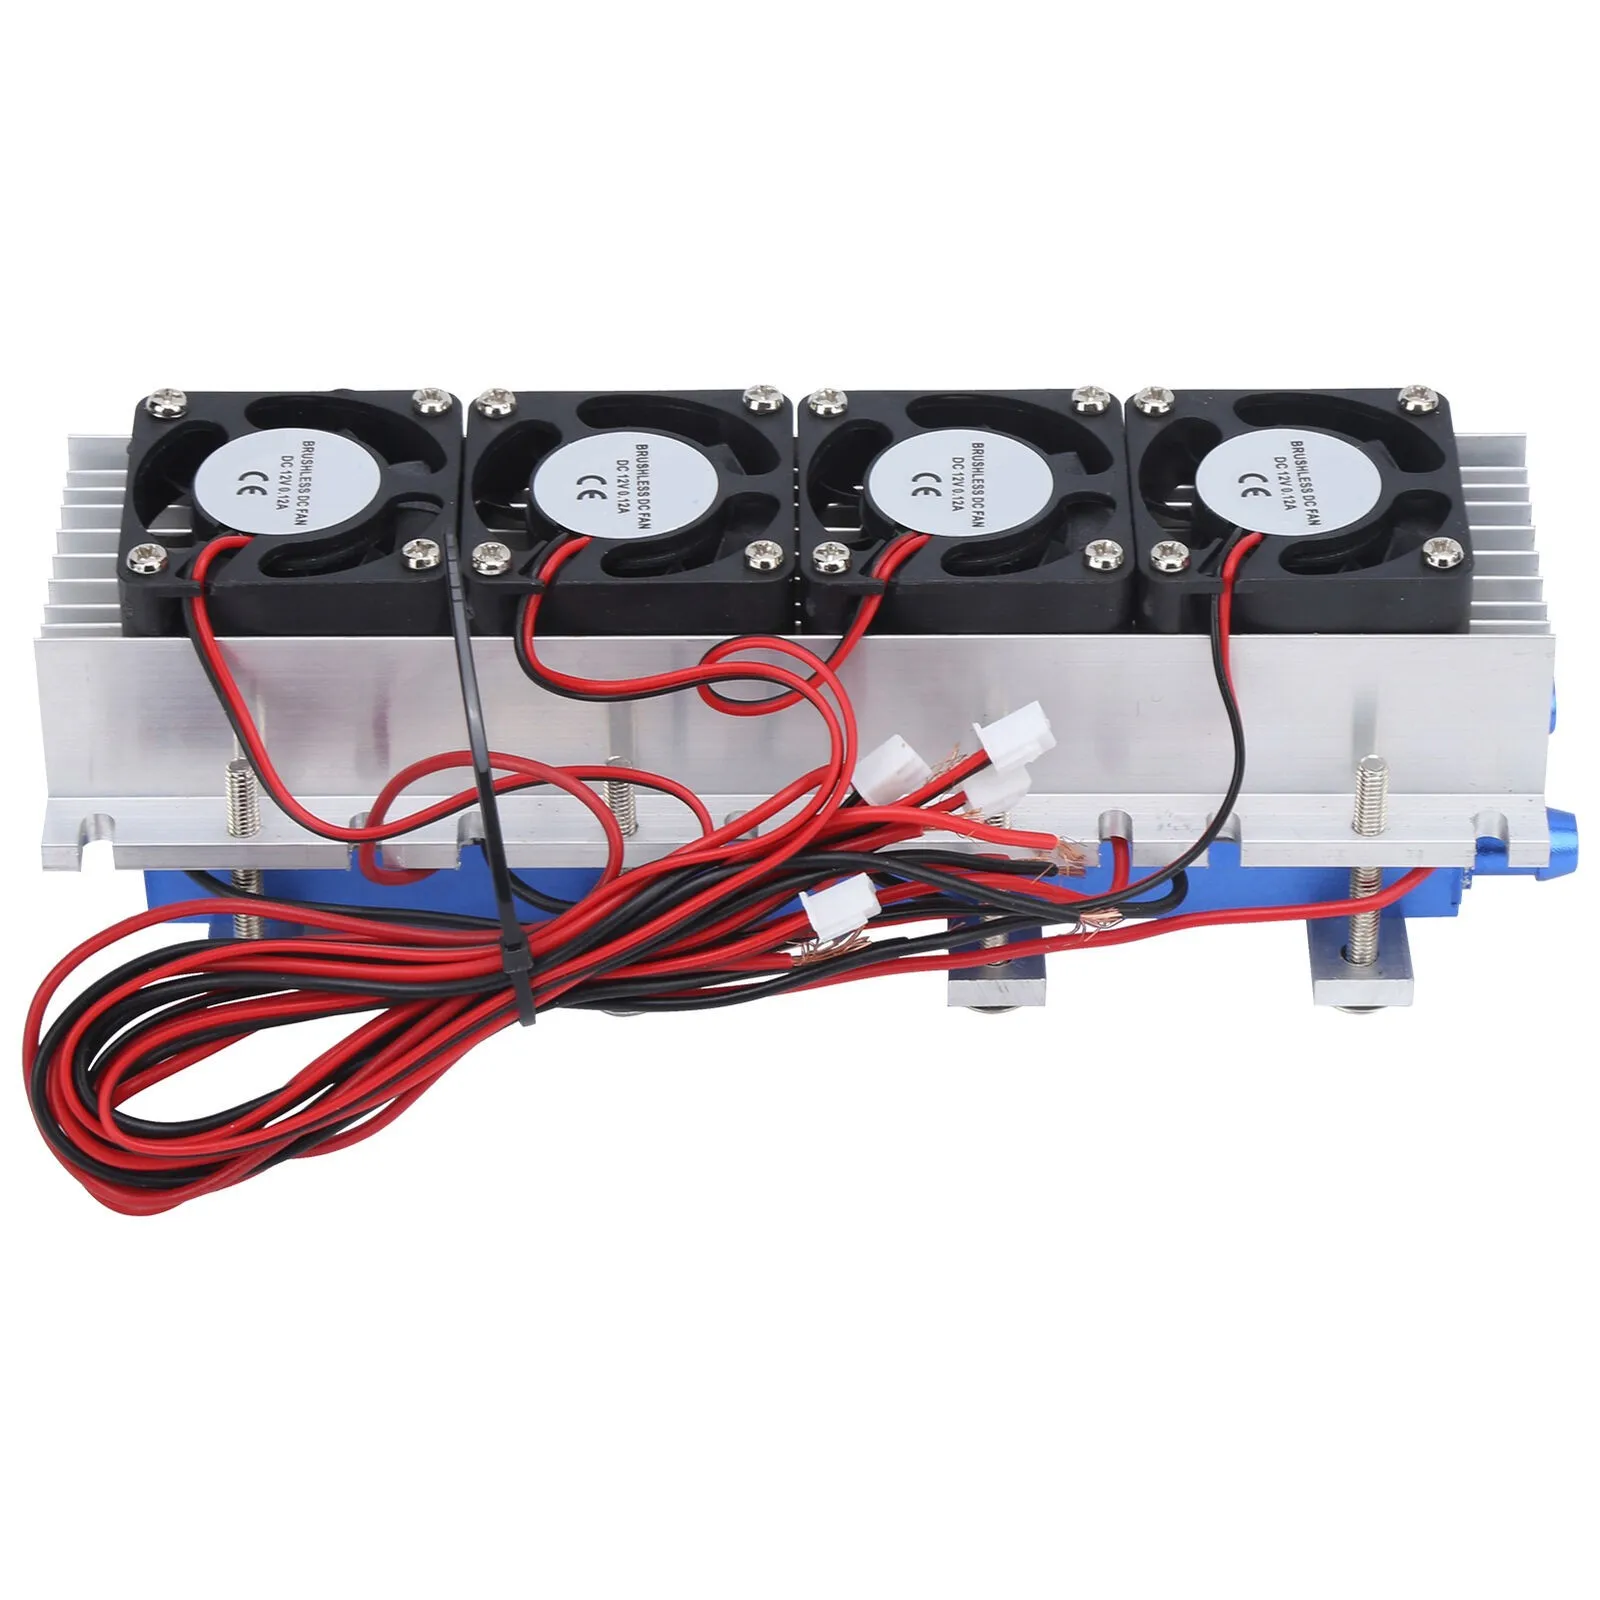 

288W 30A Thermoelectric Peltier Refrigeration Cooler DC12V Semiconductor Air Conditioning Refrigeration System DIY Kit